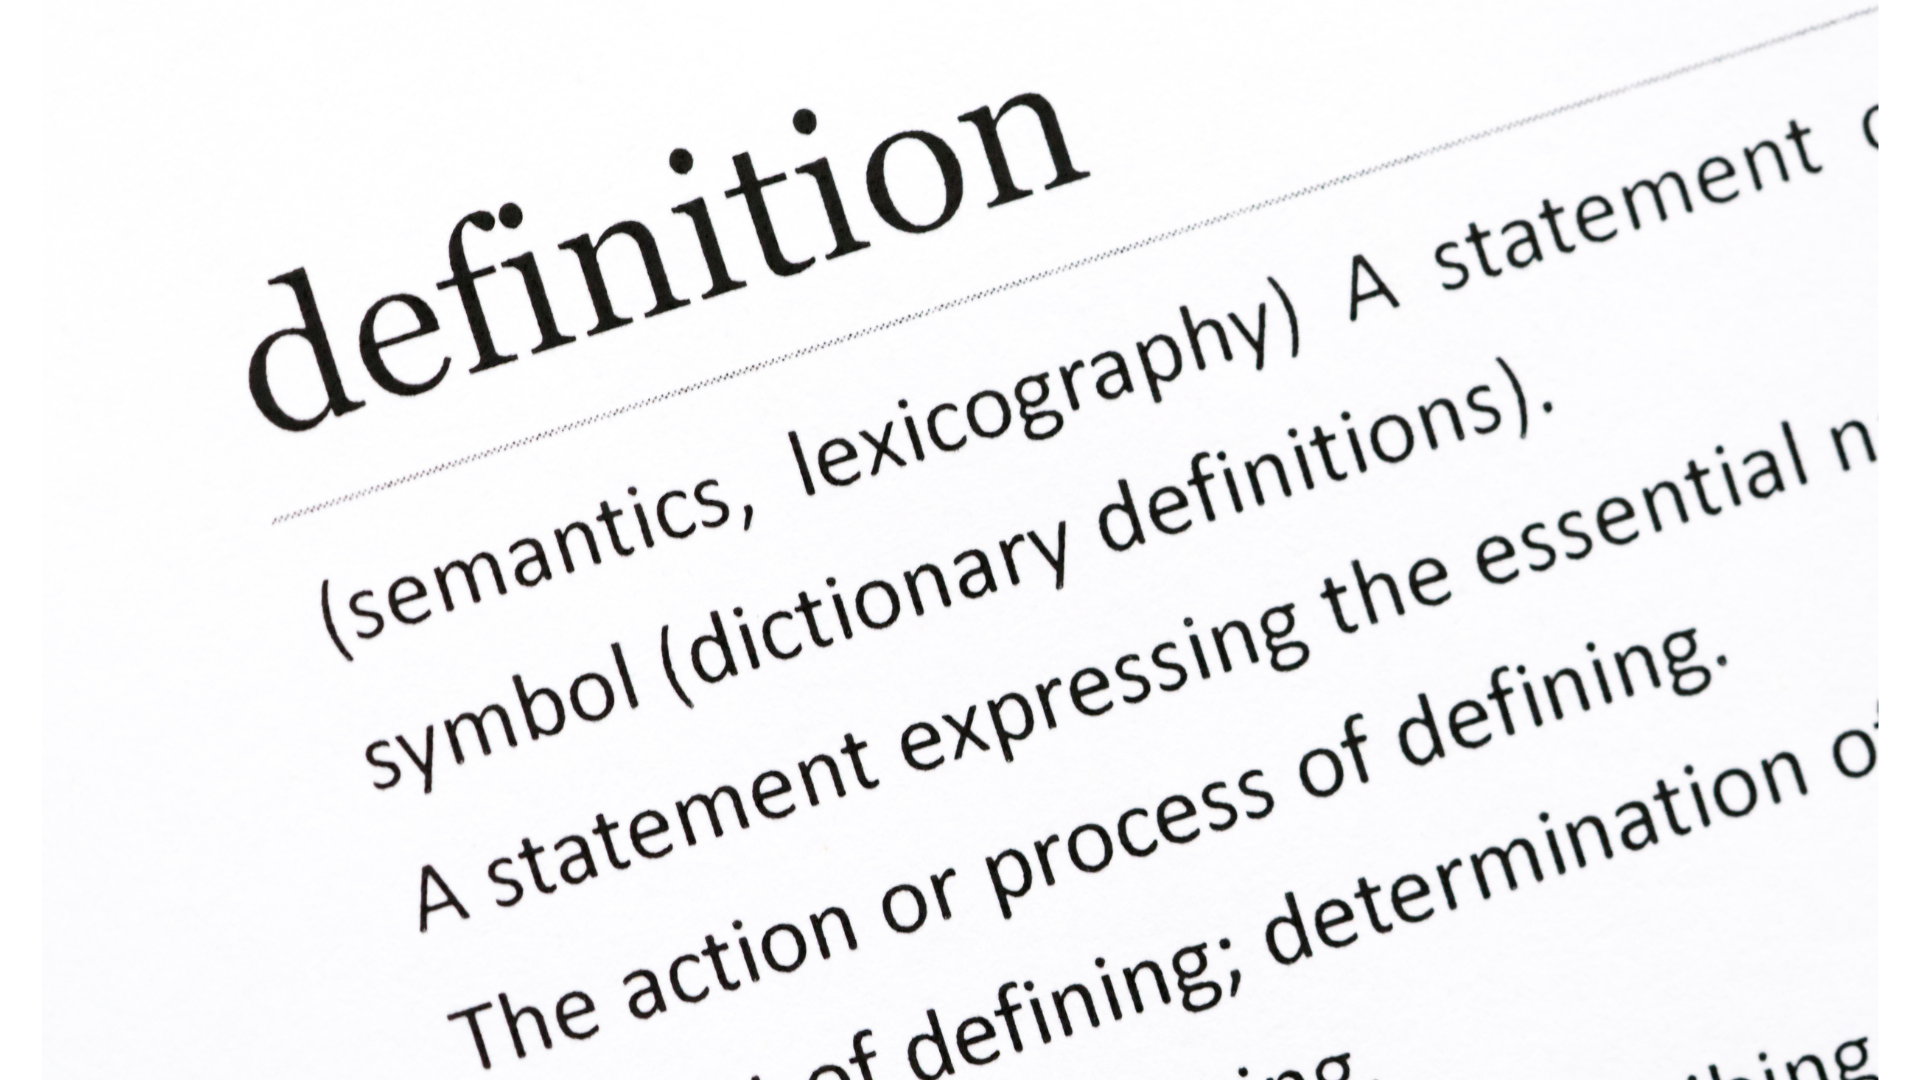 definition of digitization terms